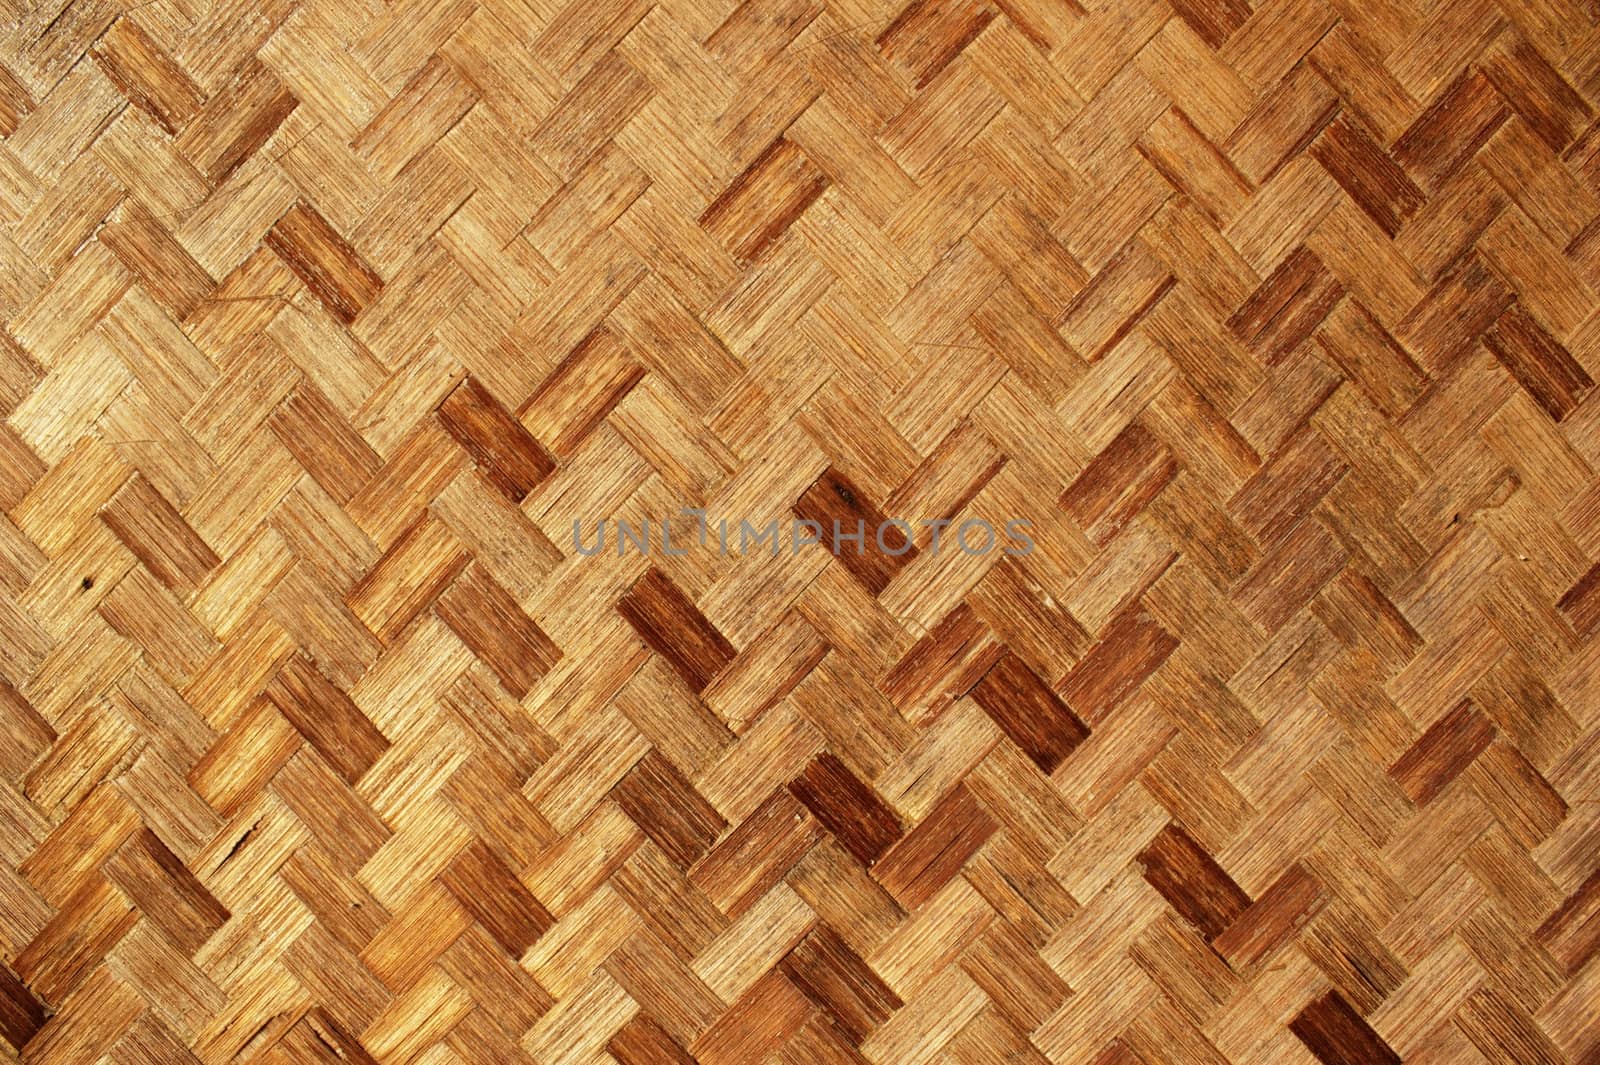 Bamboo Knit Mat Background Texture by RichieThakur